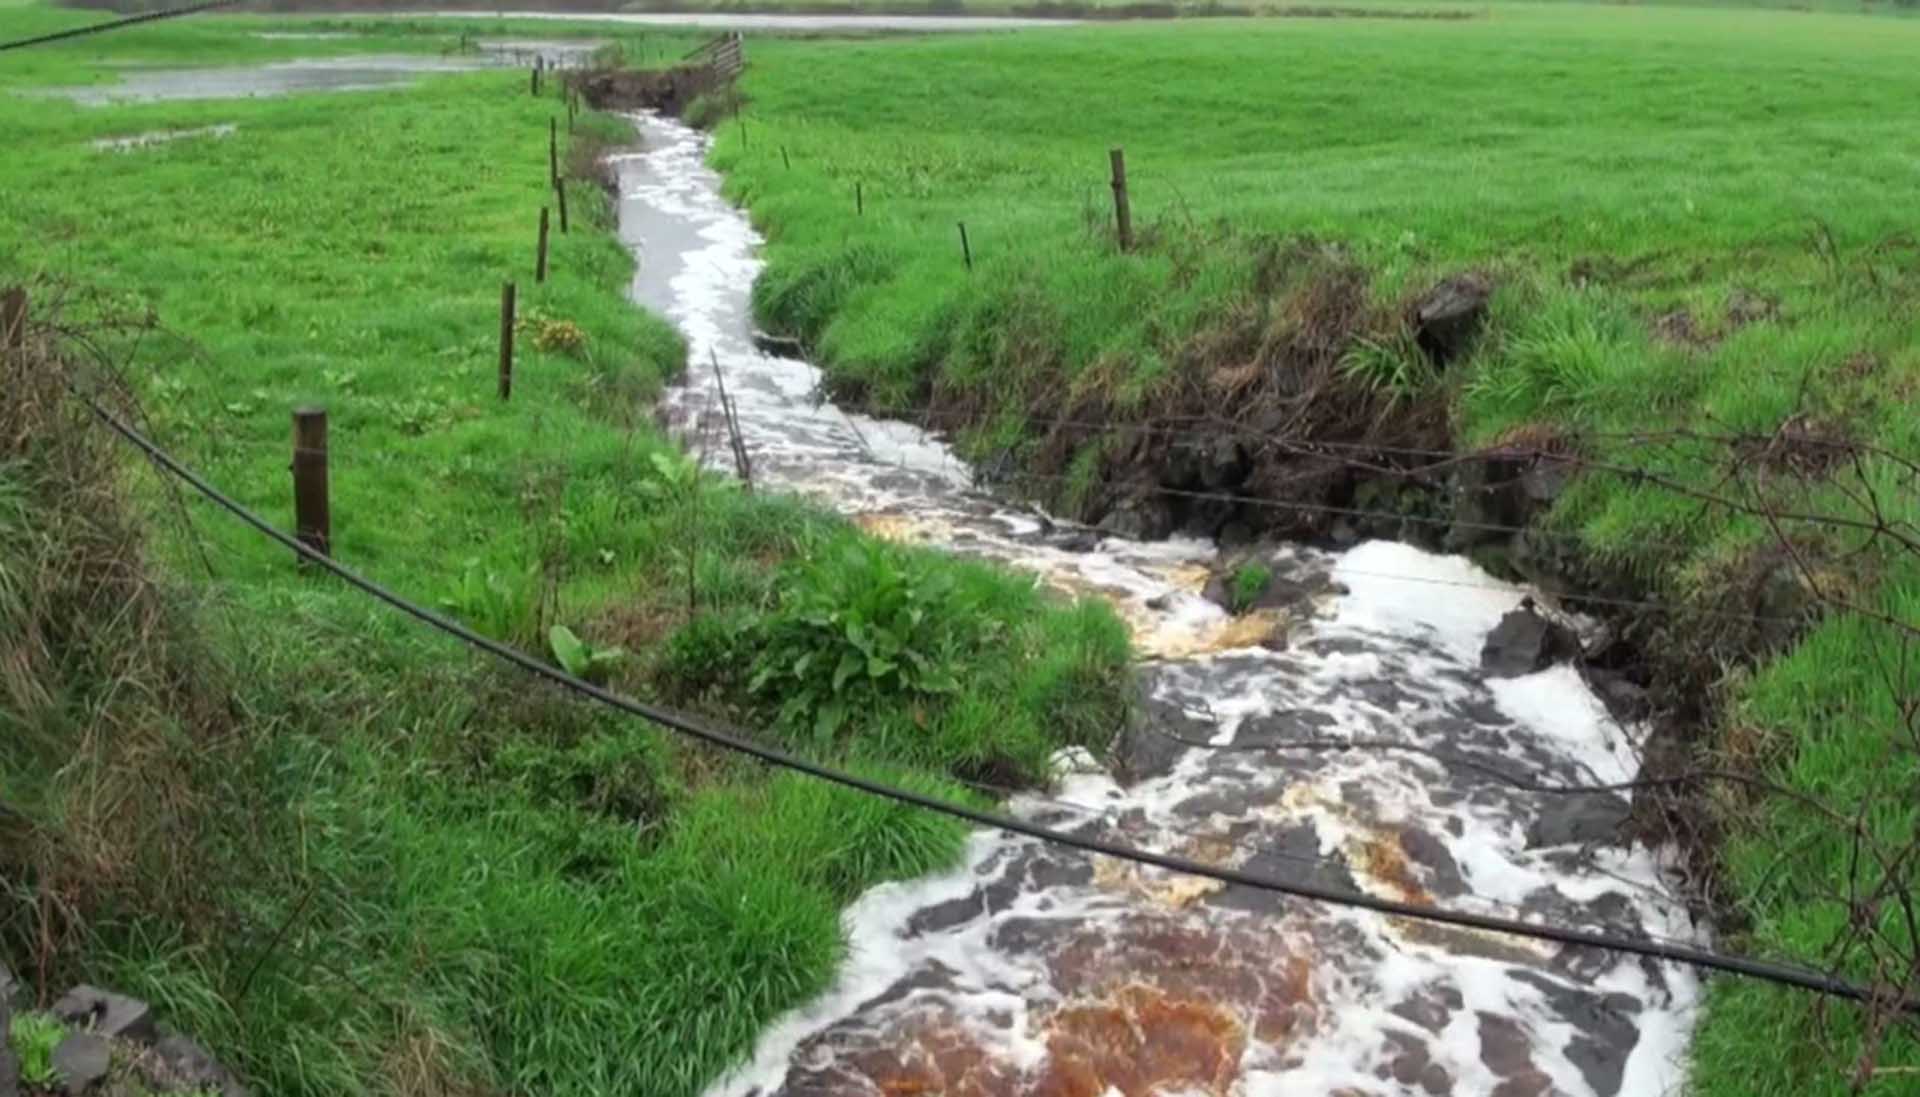 A turbulent, muddy river intersecting green fields on either side.